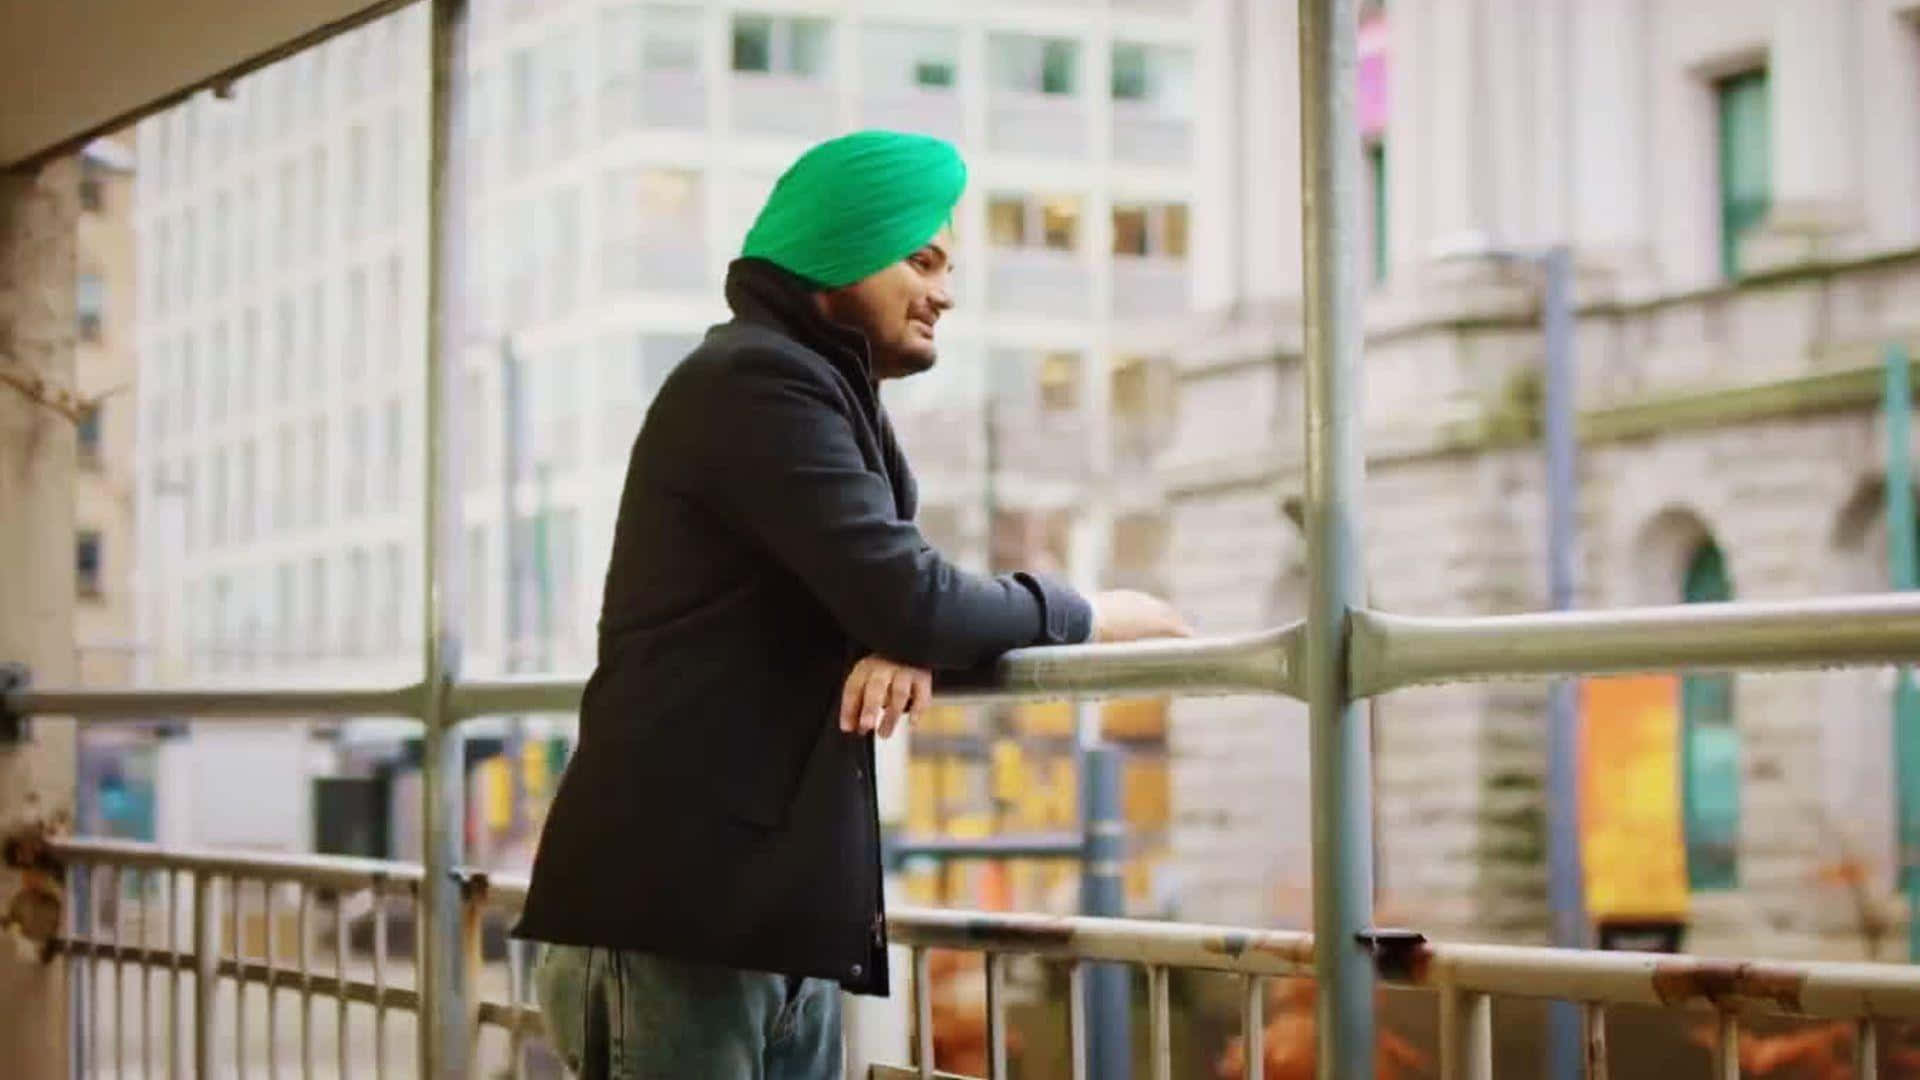 A Man In A Green Turban Leaning On A Railing